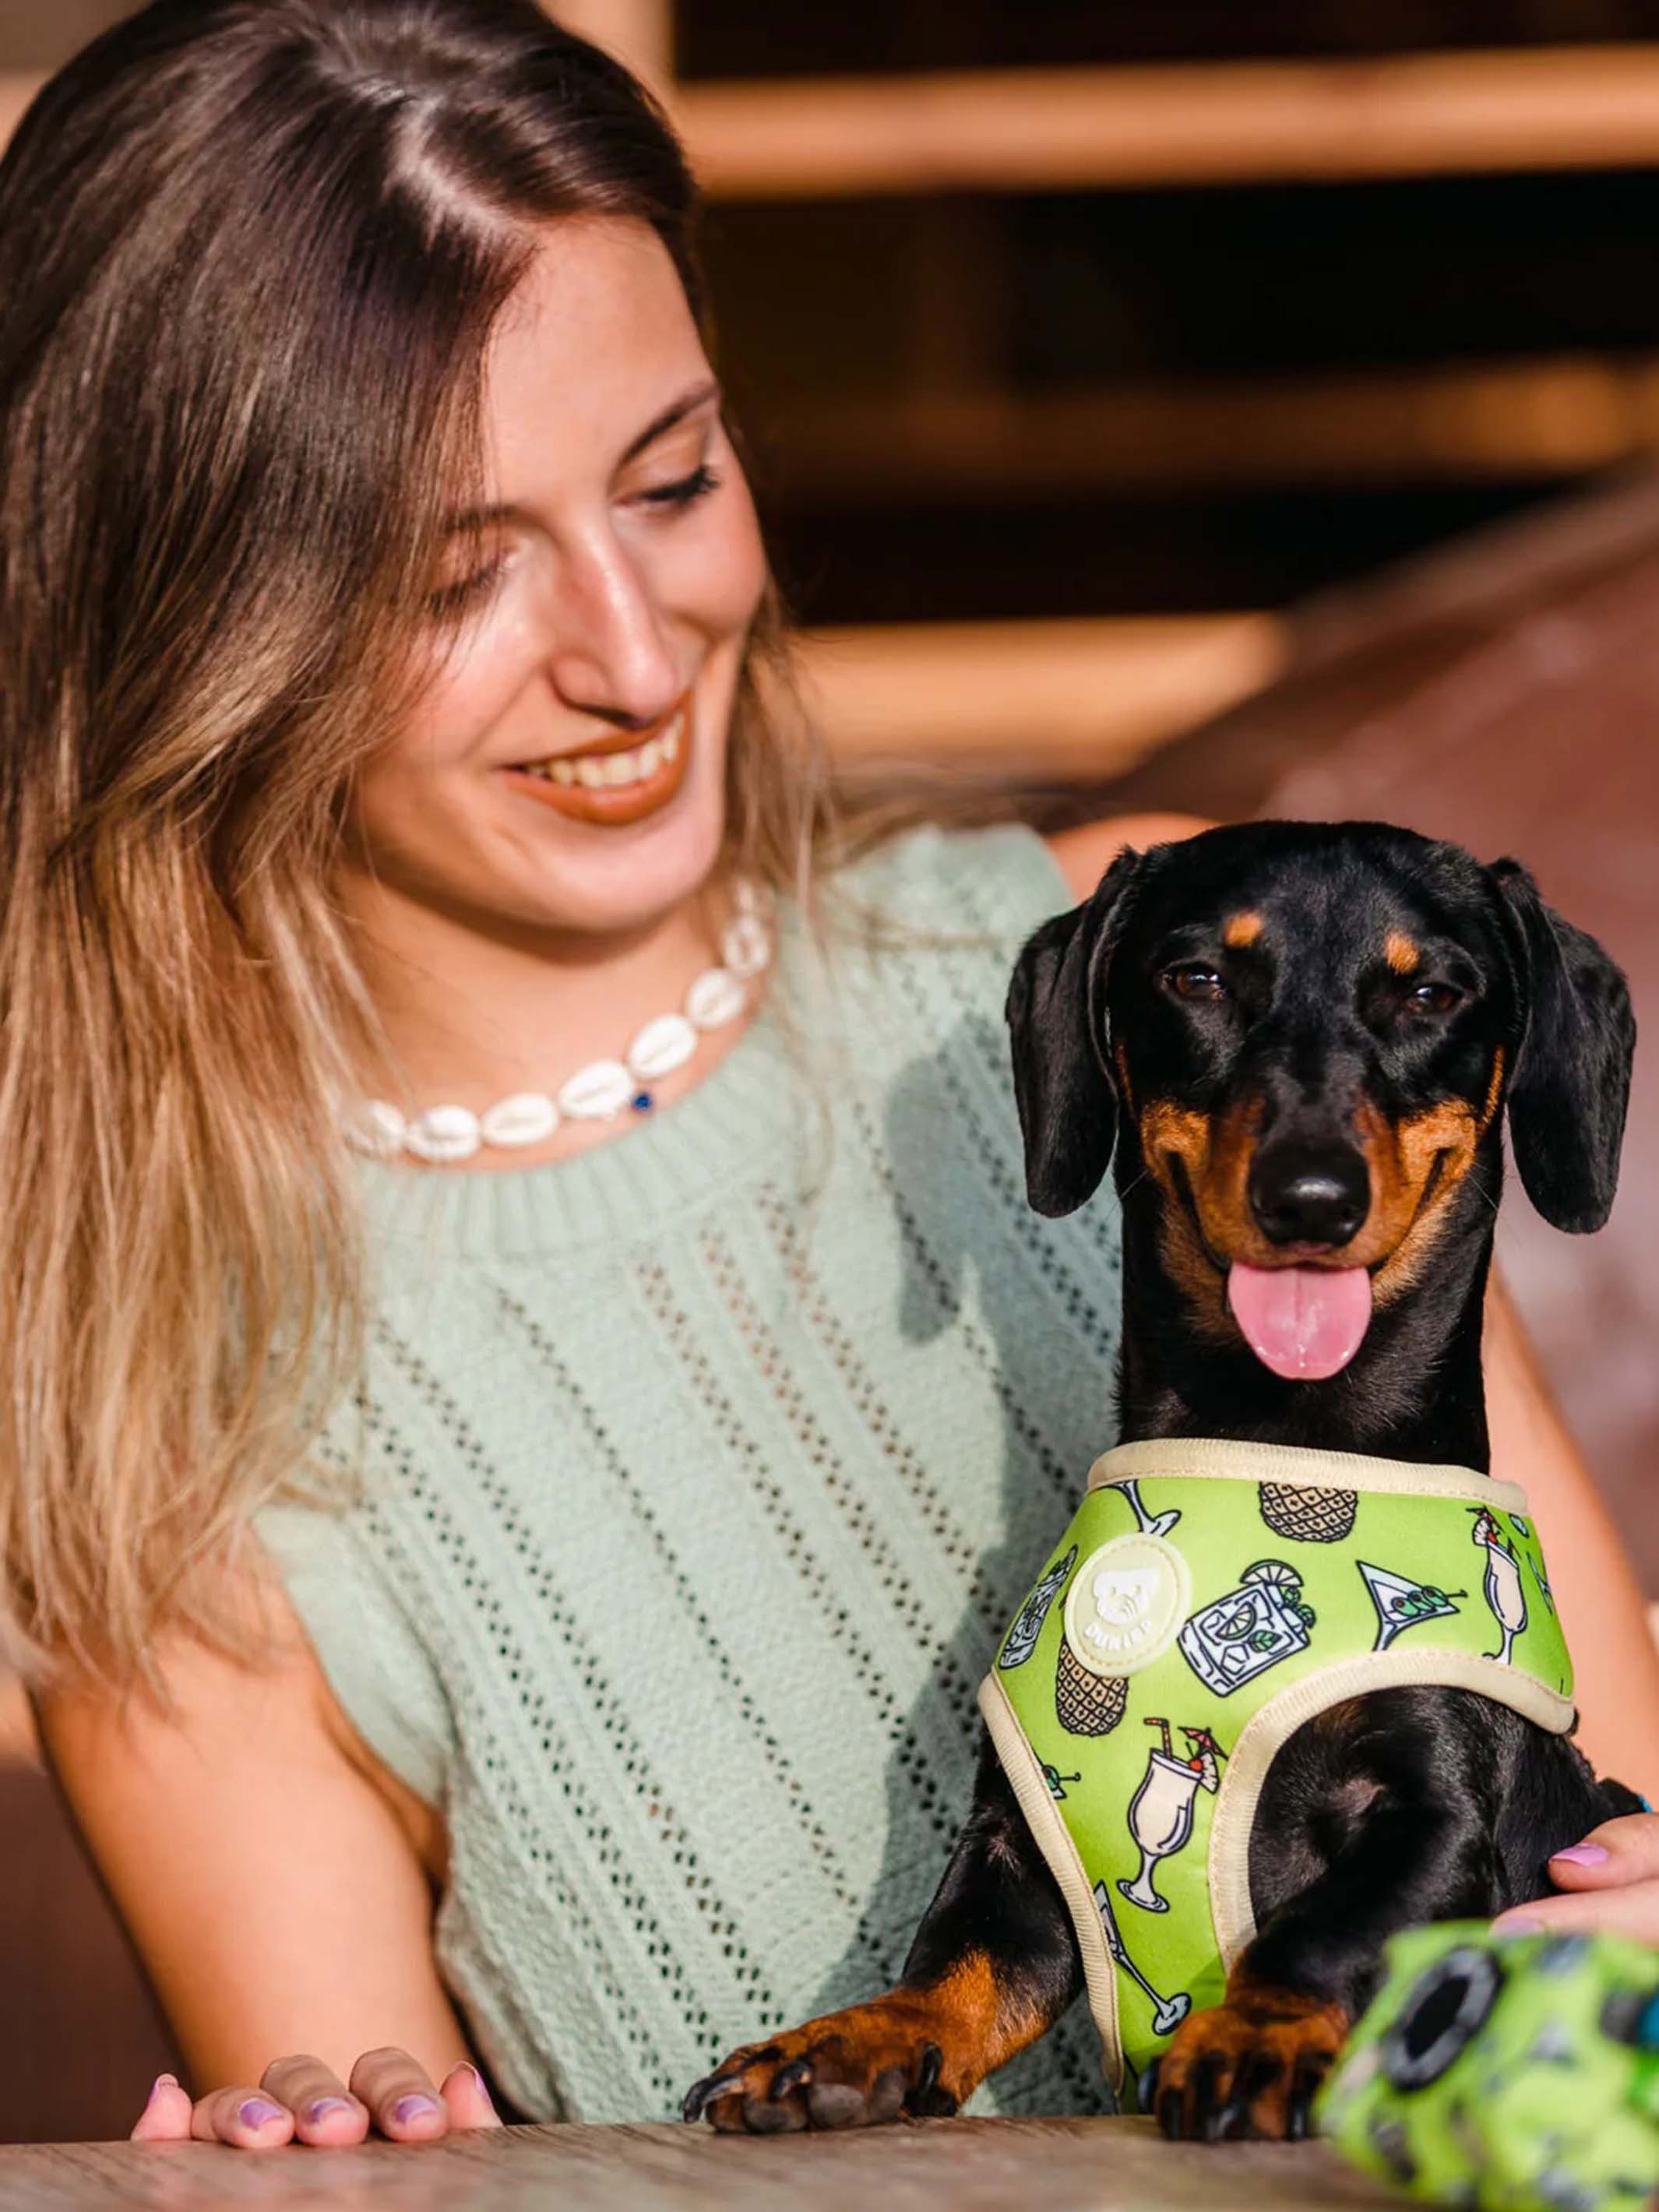 COCKTAIL REVERSIBLE DOG HARNESS